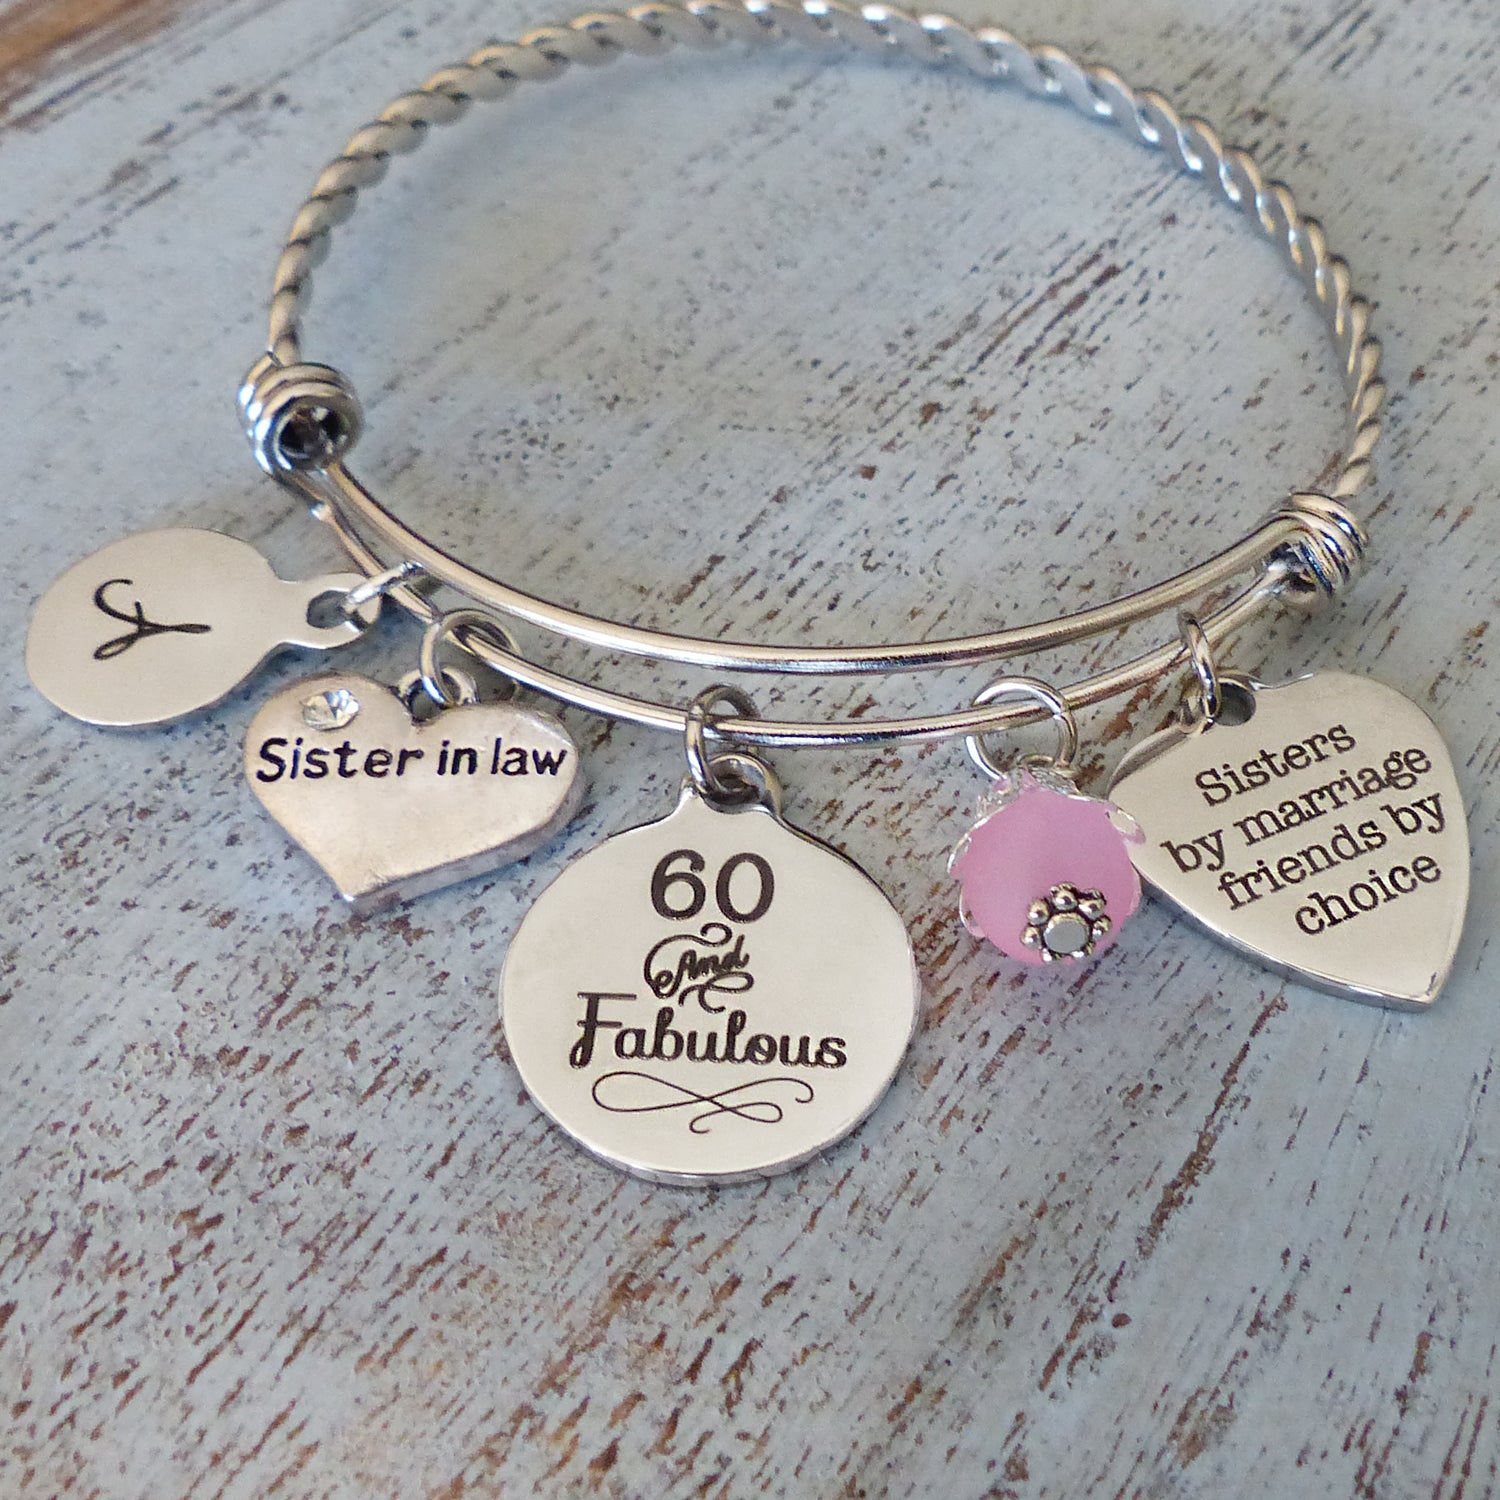 personalized sister in law bangle bracelet sisters by marriage friends by choice charm, round letter charm and pink bead with 60 and Fabulous charm